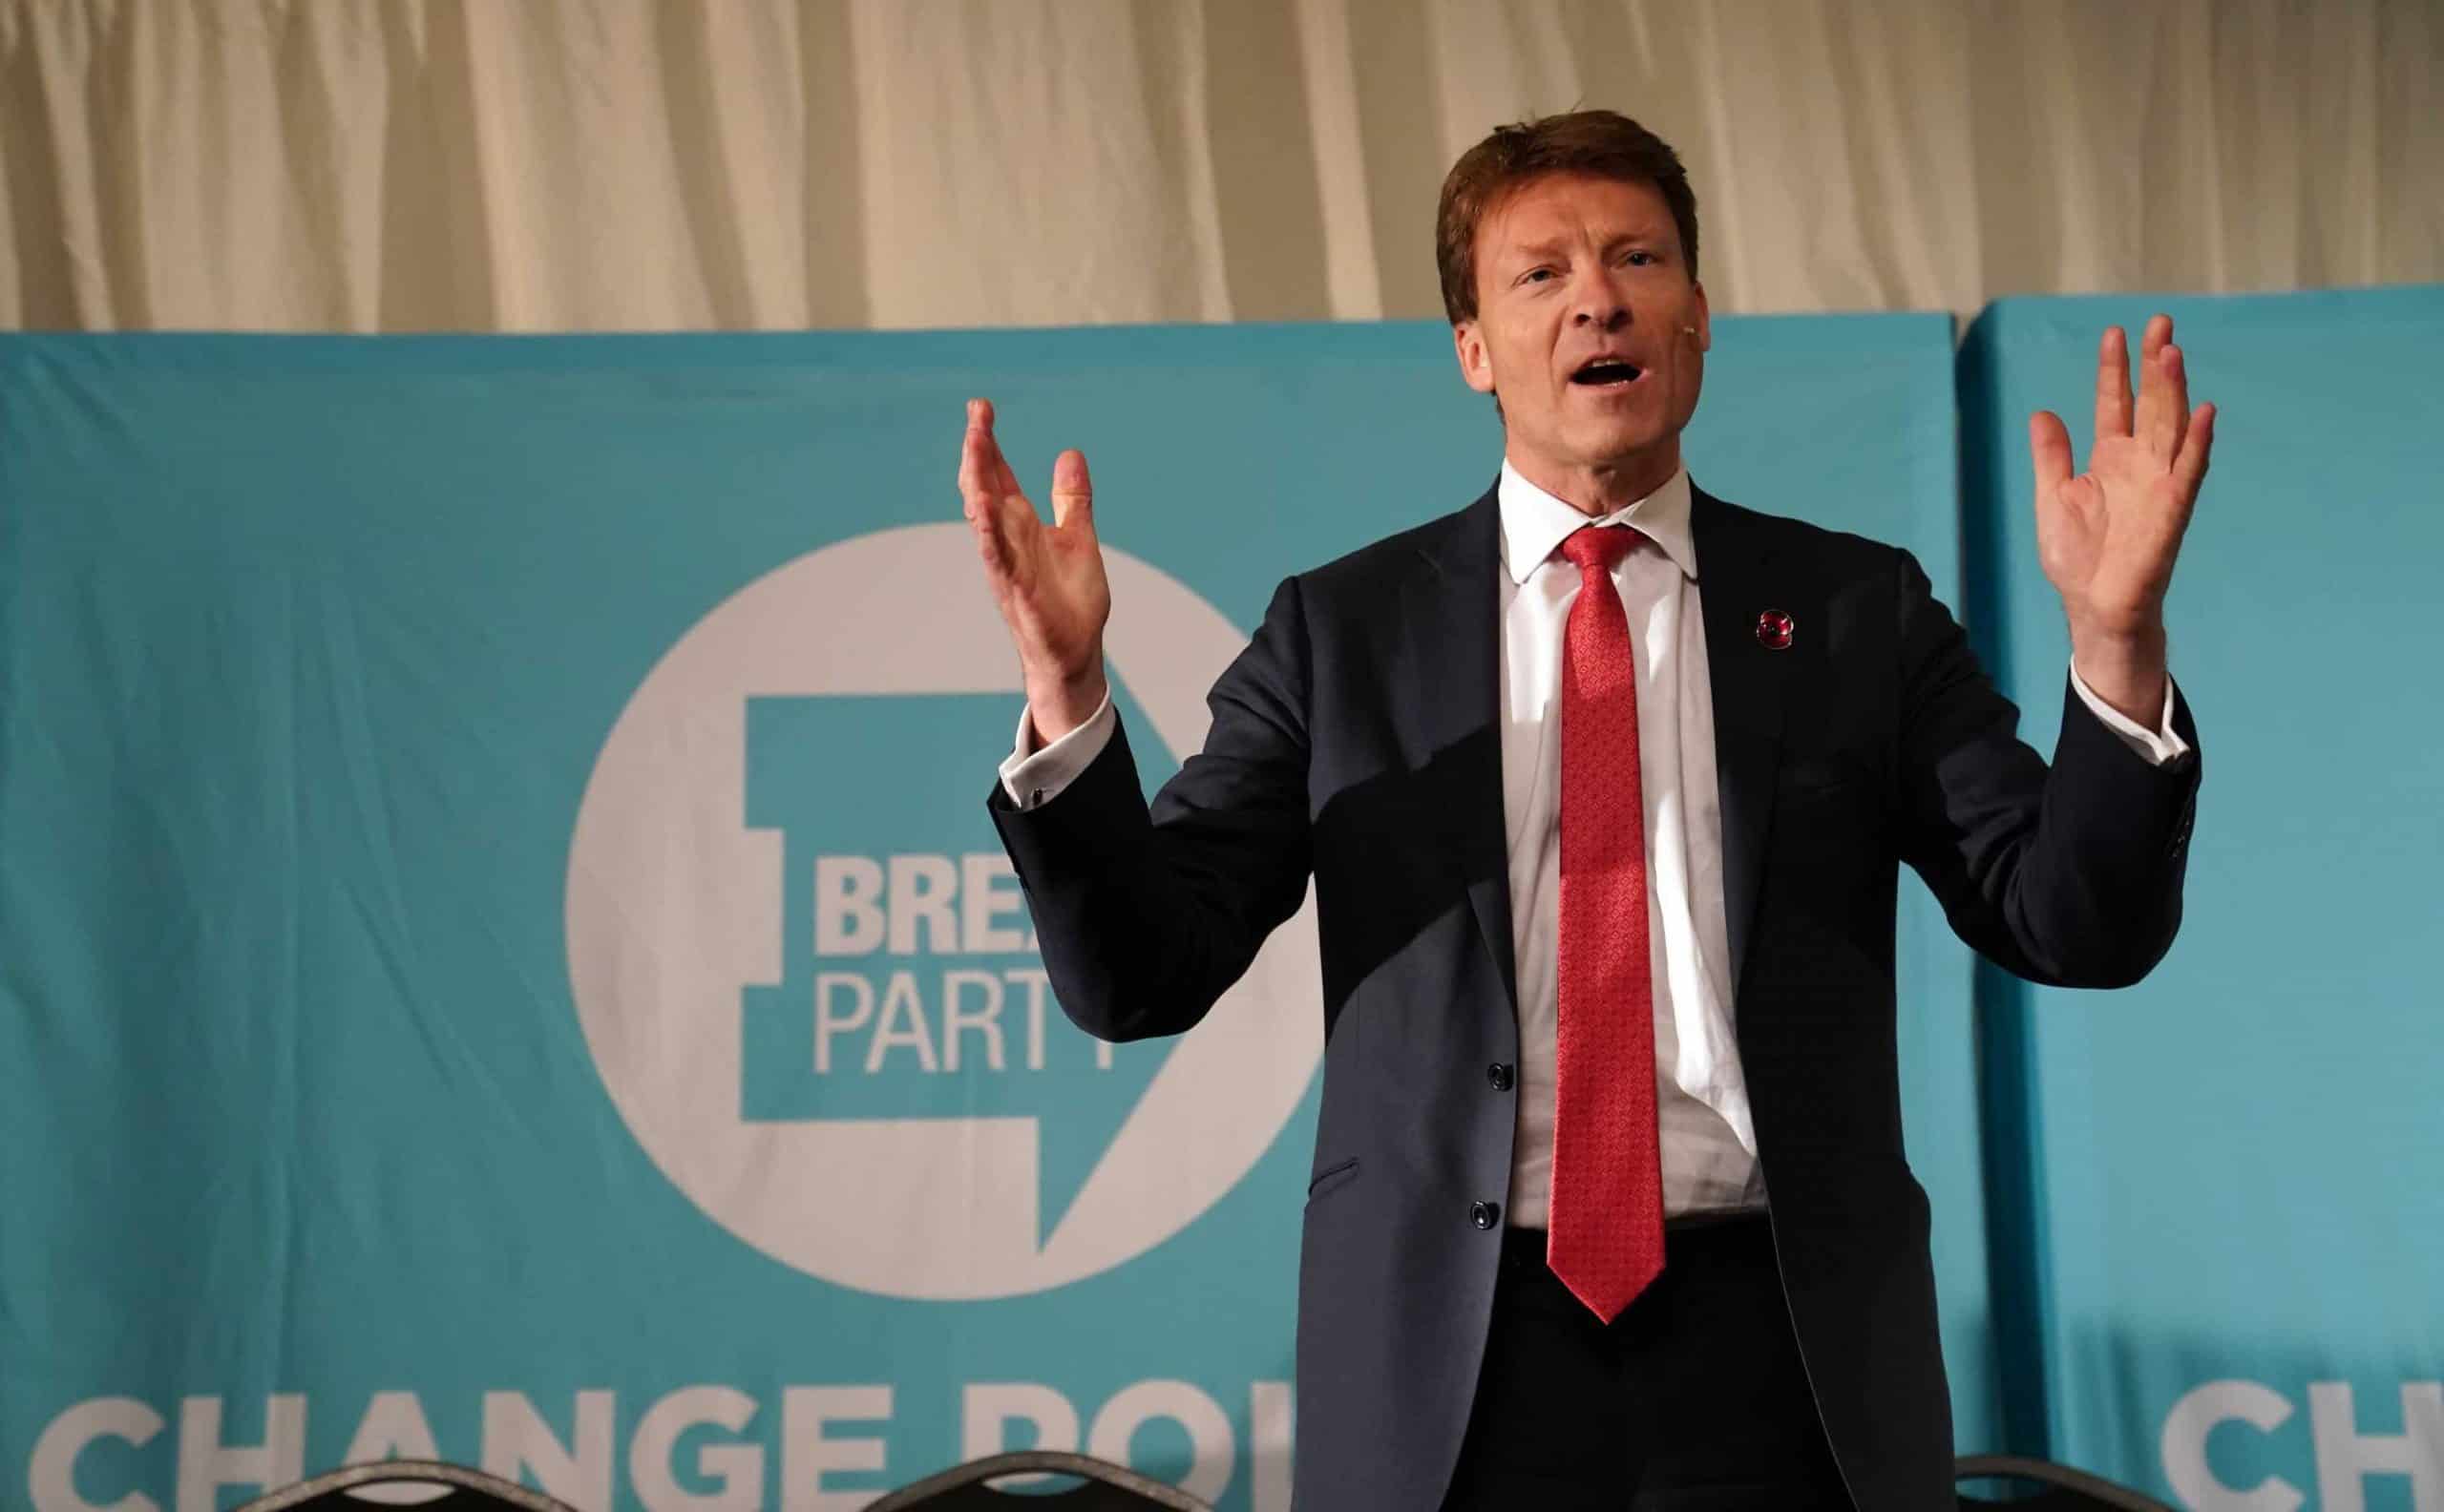 Brexit Party takes action over ‘racist’ comments by activists